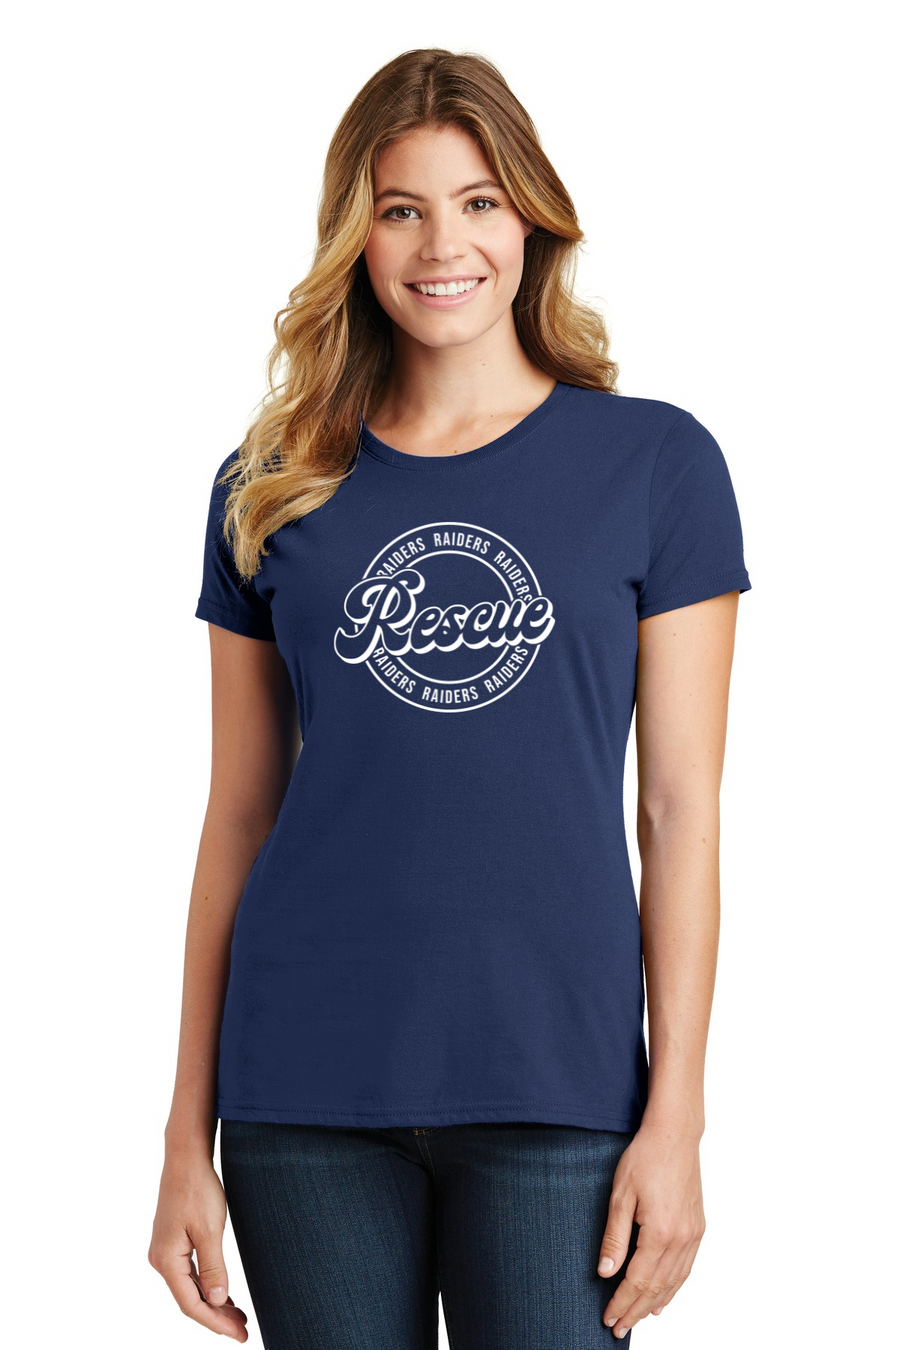 Rescue Elementary Spirit Wear 2023/24 On-Demand-Port and Co Ladies Favorite Shirt